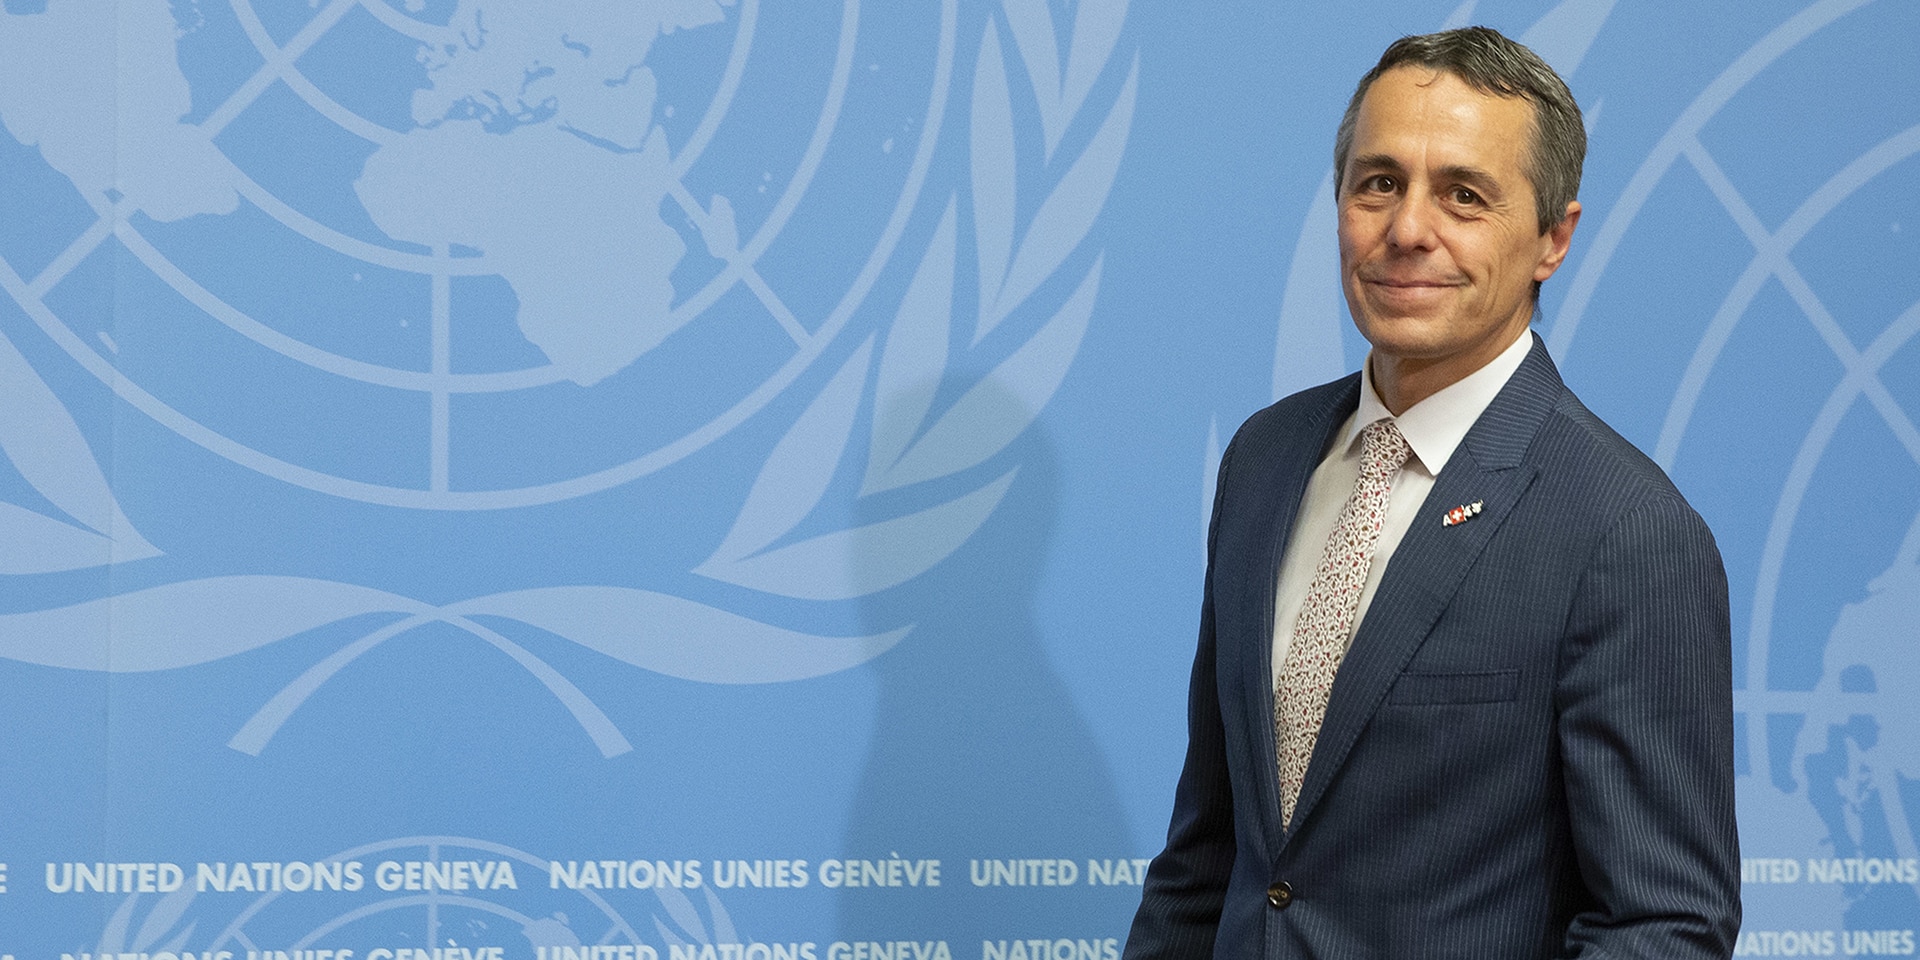 Federal Councillor Ignazio Cassis stands in front of a podium, behind him a wall with the UN logo.